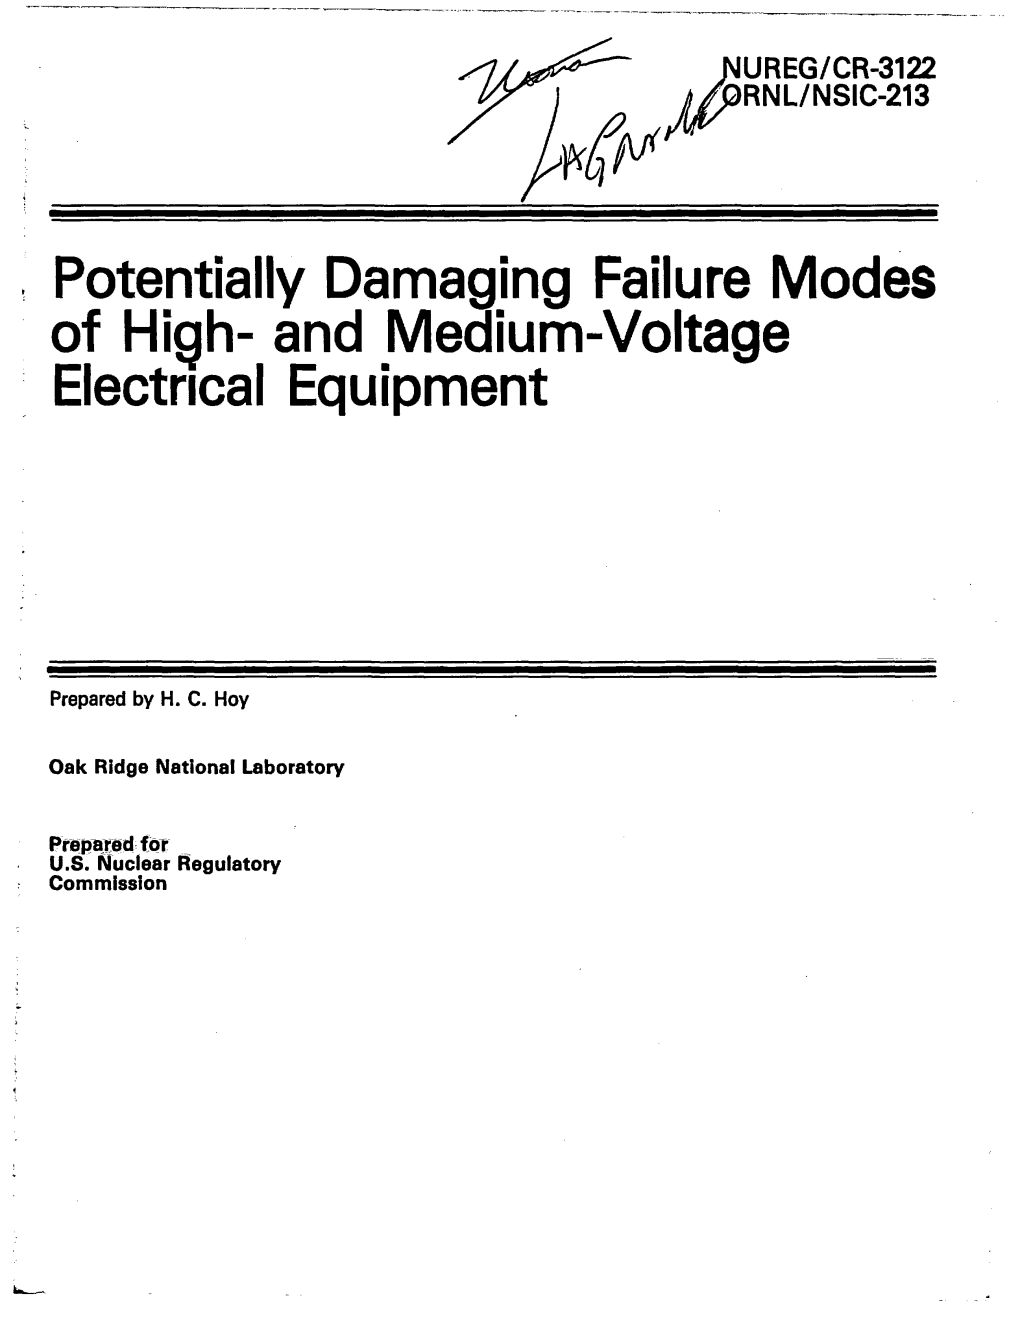 Potentially Damaging Failure Modes of High- and Medium-Voltage Electrical Equipment